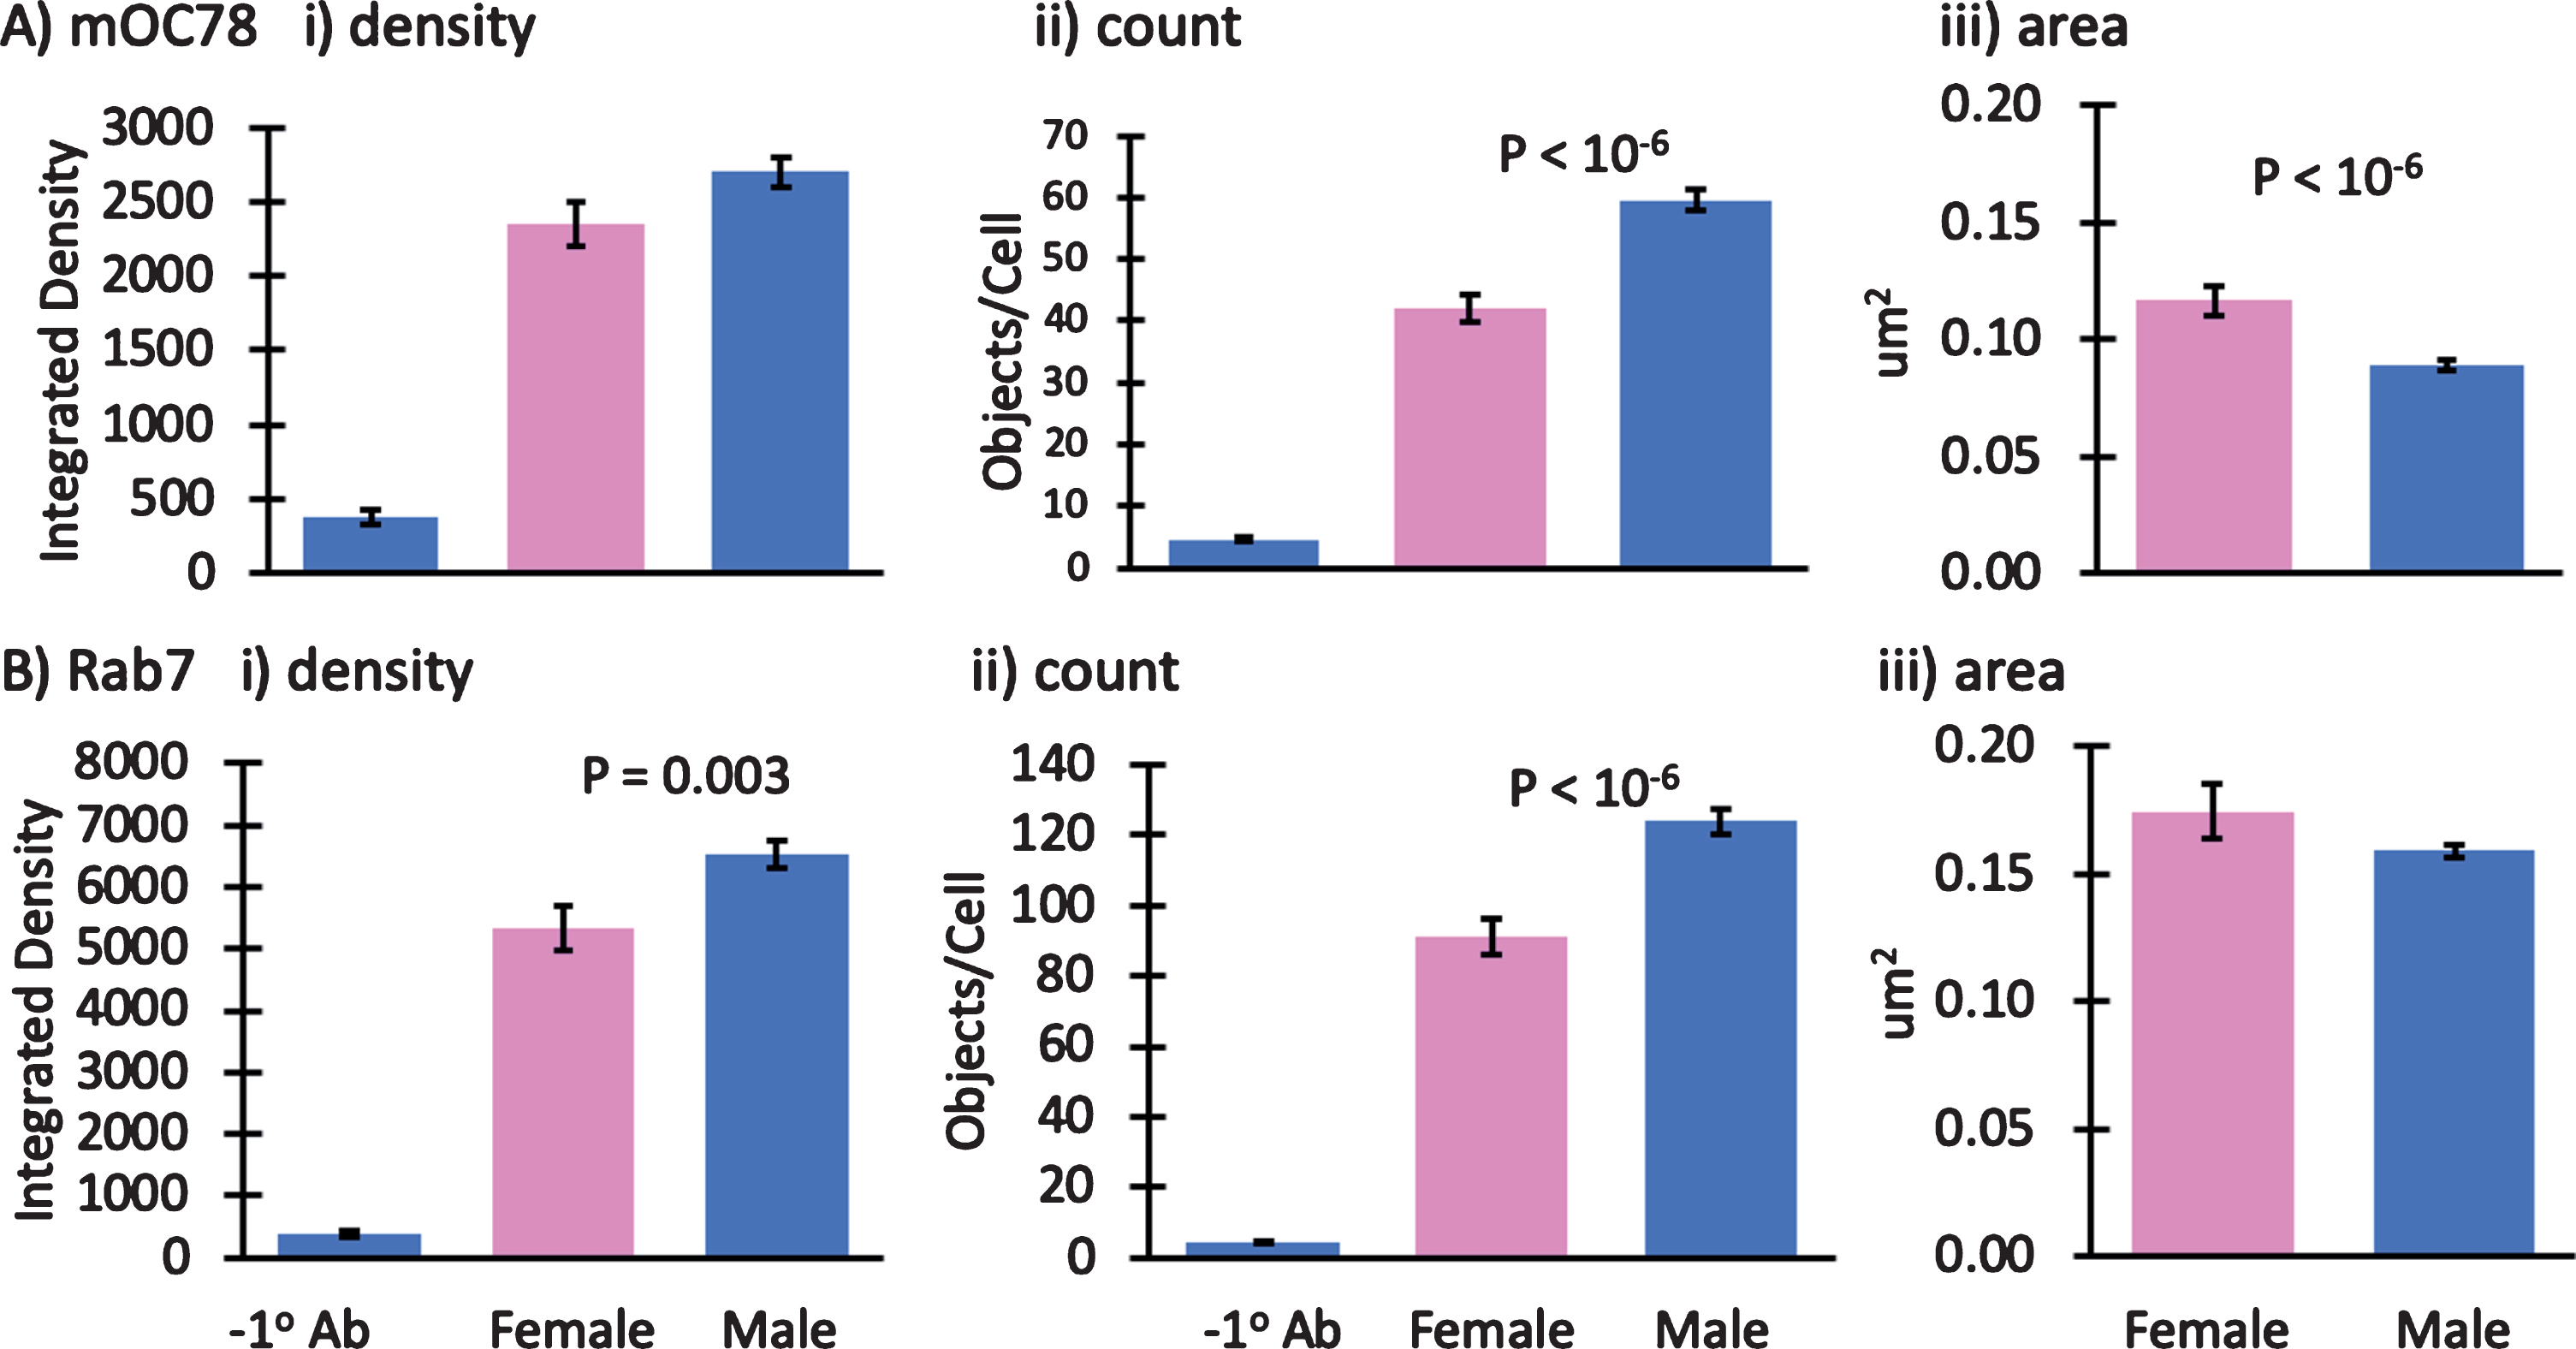 Small effect of mouse gender on mOC78 and Rab7 immunoreactivity. Male to female comparisons of A) mOC78 and B) rab7 immunoreactivity in neurons from 4-month-old mice. i) integrated density; ii) object counts/cell; iii) area per object. We have reported results from both male and female mice. To determine how dependent the results were on gender, in one experiment we explicitly compared mOC78 and Rab7 immunoreactivity in neurons from a female to a male 4-month-old 3xTg-AD mouse. A shows an insignificant 15% increase in mOC78 immunoreactive density per cell in the male compared to the female. The object counts per cell were 43% higher in the male with 33% smaller areas, compared to the female. B shows Rab7 immunoreactive density per cell was 22% higher in the male compared to the female. The object counts per cell were 36% higher in the male with only 6% smaller areas, compared to the female. Colocalization of mOC78 with Rab7 was 0.83 for both sexes. Since mOC78 male measures were increased over females in proportion to the mass effect of sex on Rab7, these results suggest that sex is not a major factor in the iAβ accumulation of mOC78 immunoreactivity. File 171013.